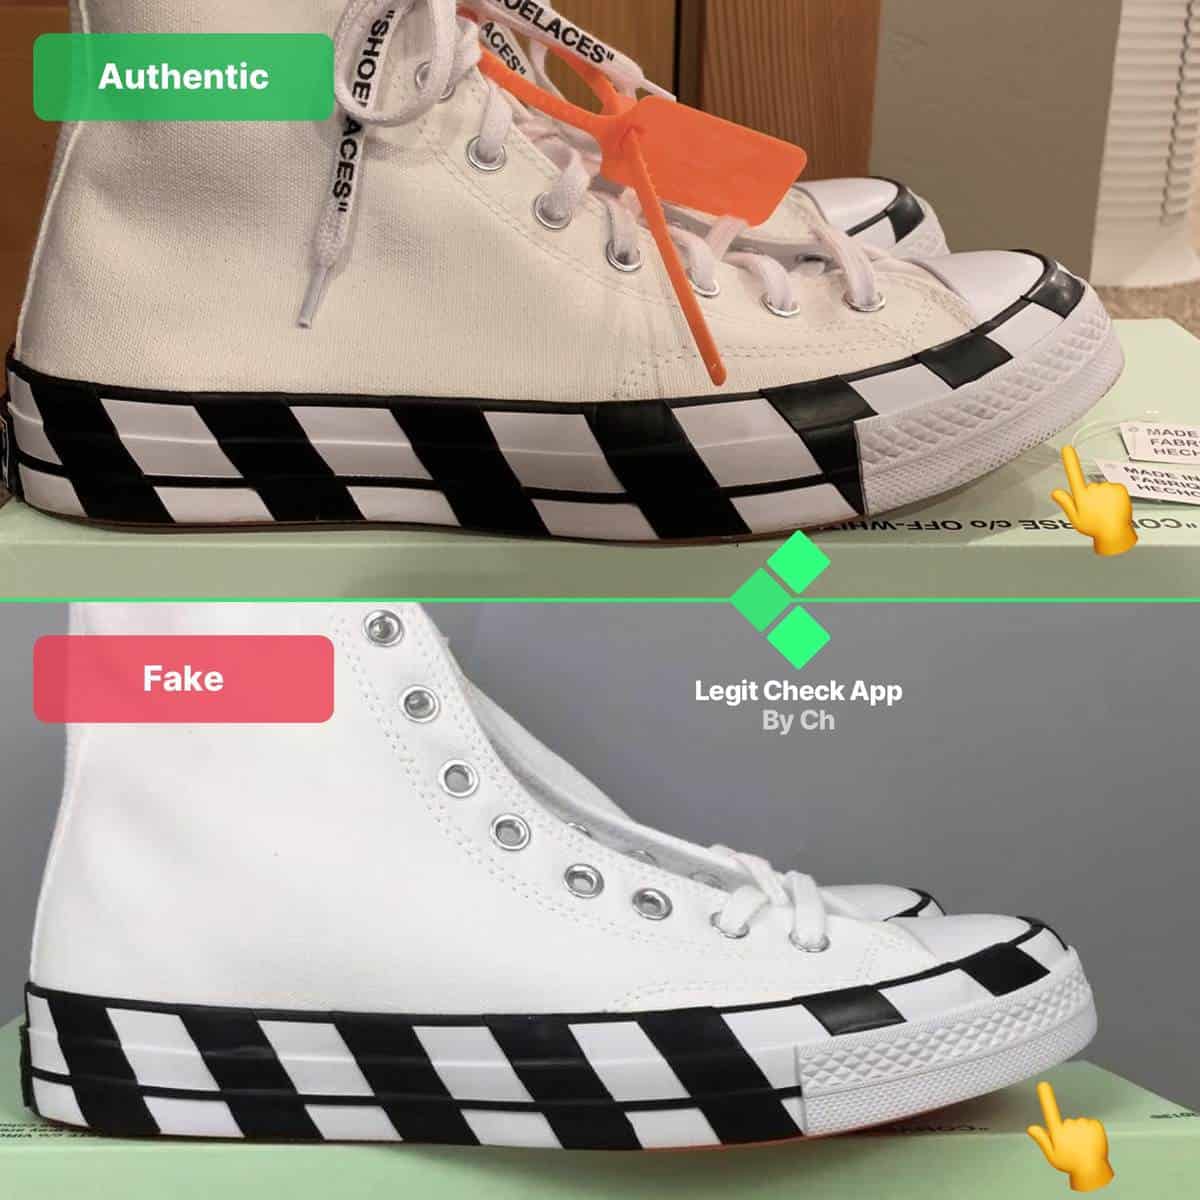 How To Spot Fake Off-White Converse 2.0 - Legit By Ch